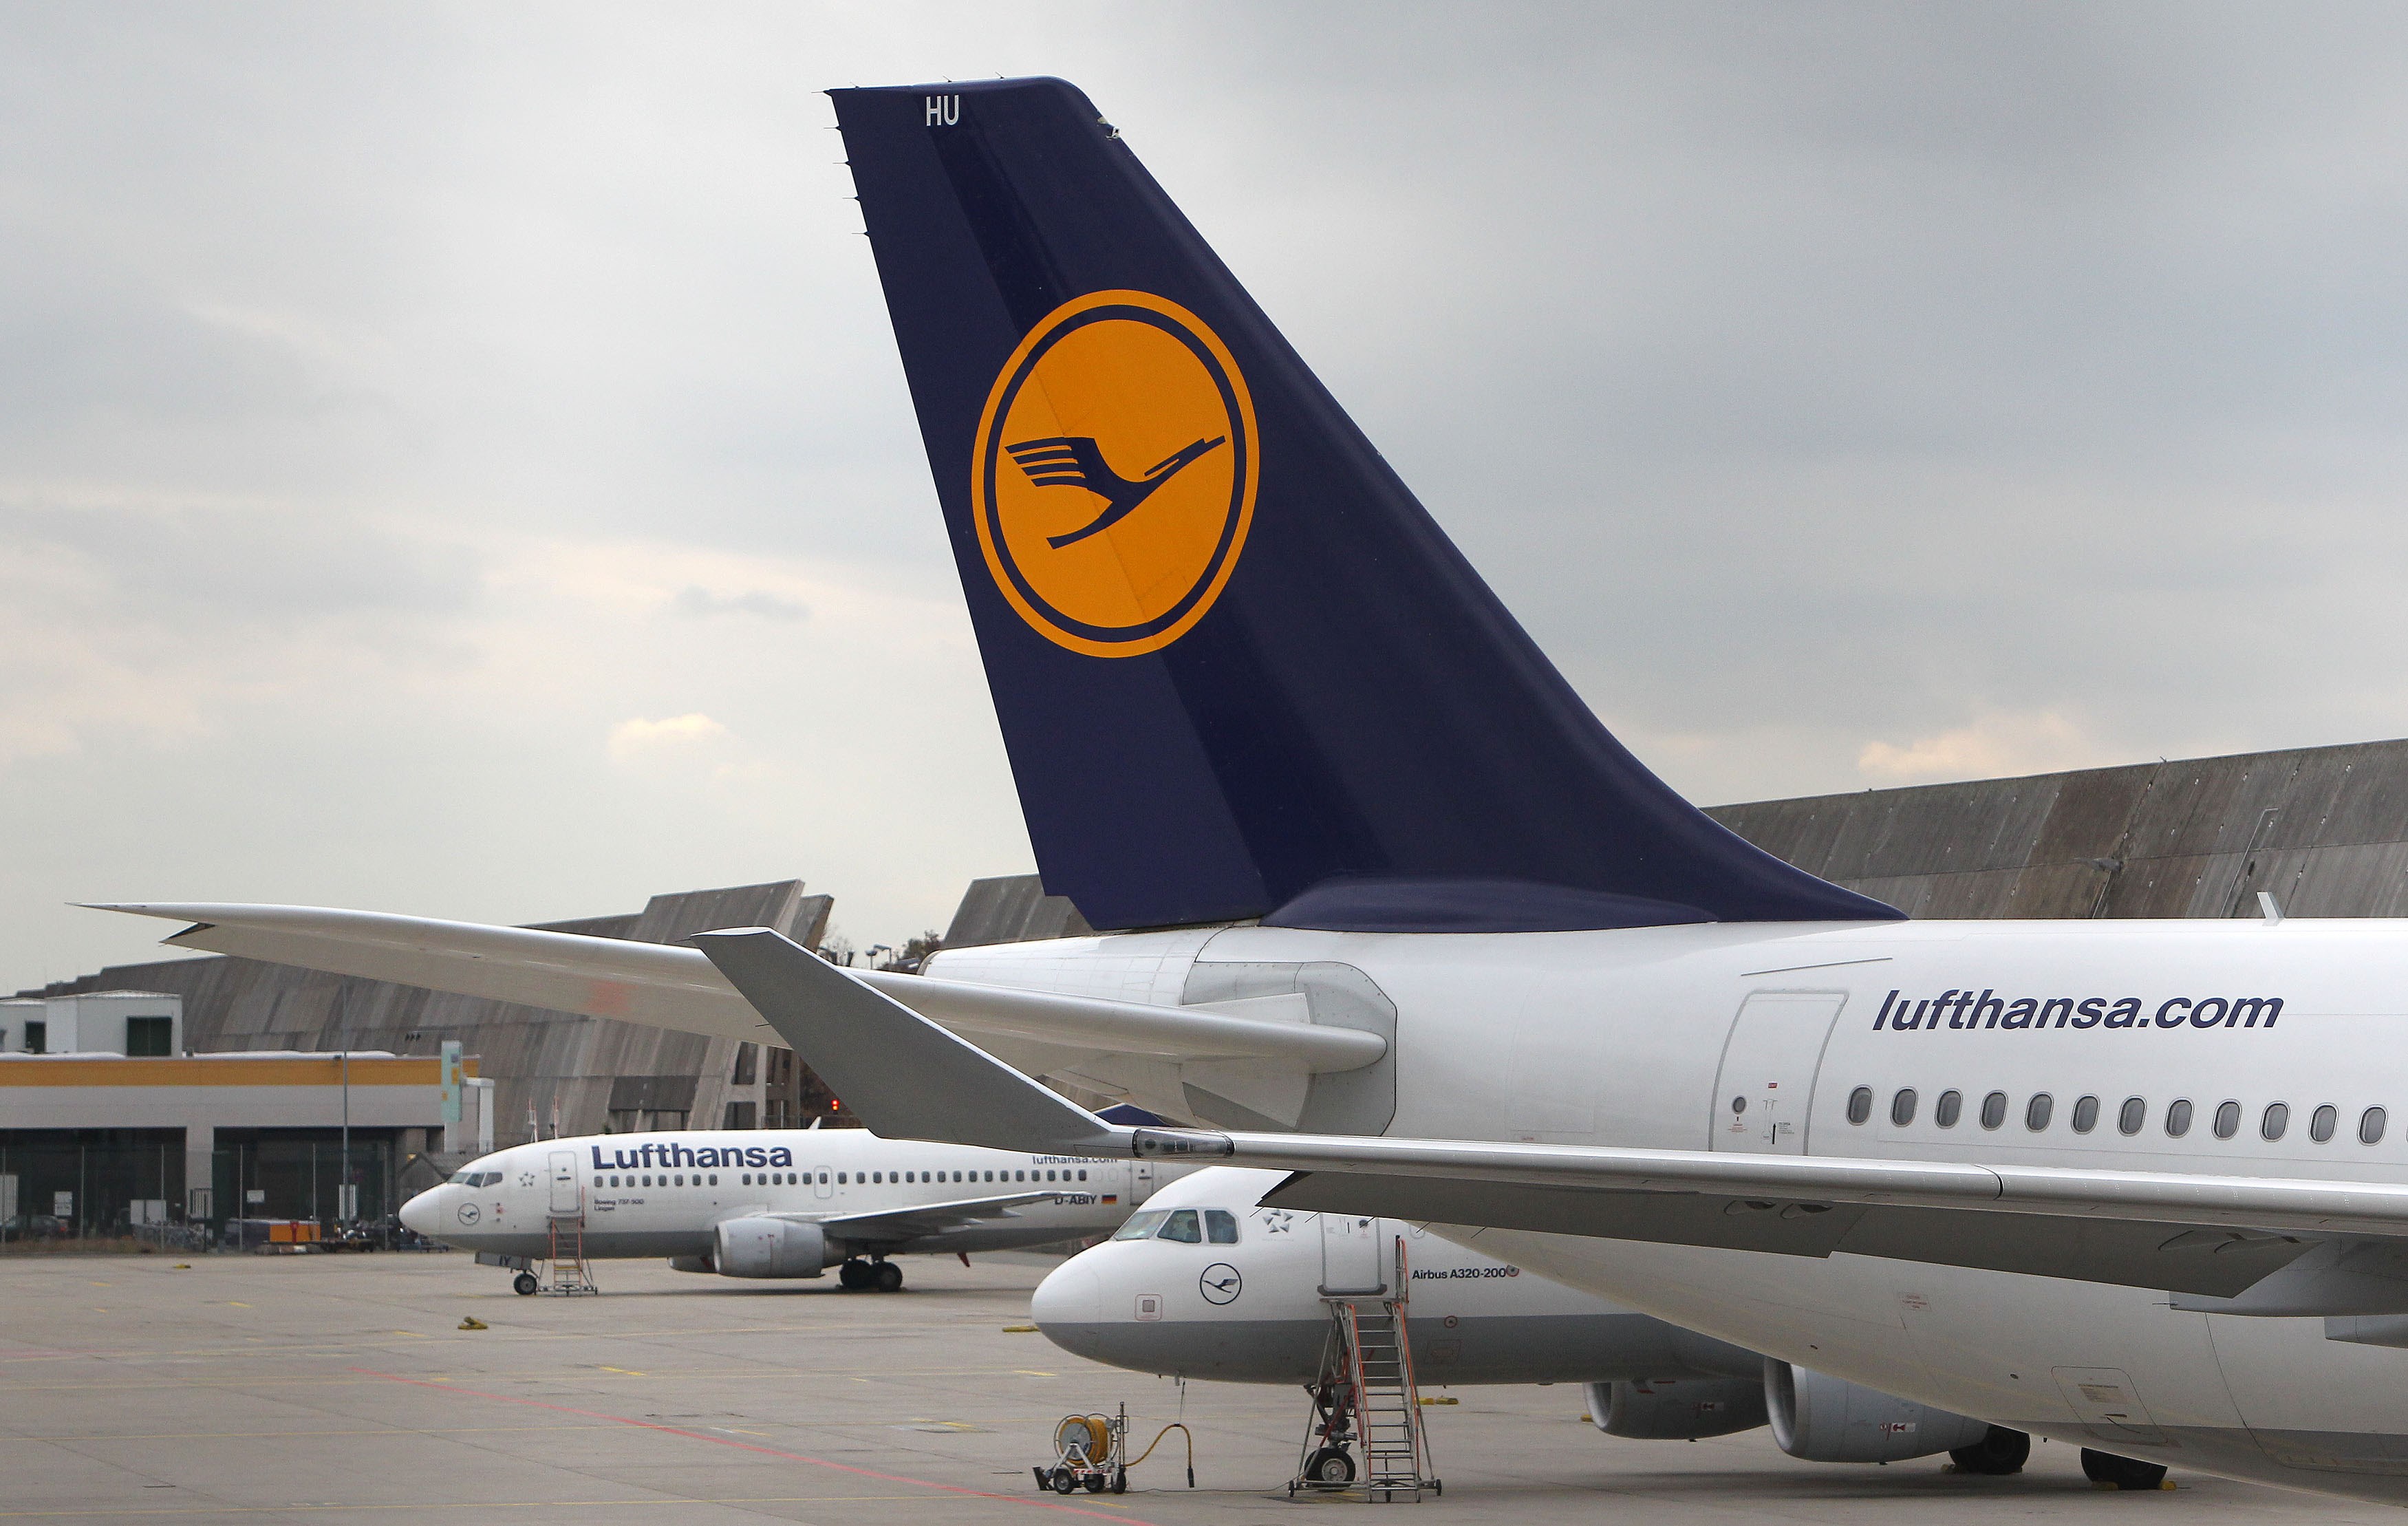 Aircrafts of German airline Lufthansa are parked at the airport in Frankfurt am Main, on November 6. (Daniel Roland—AFP/Getty Images)